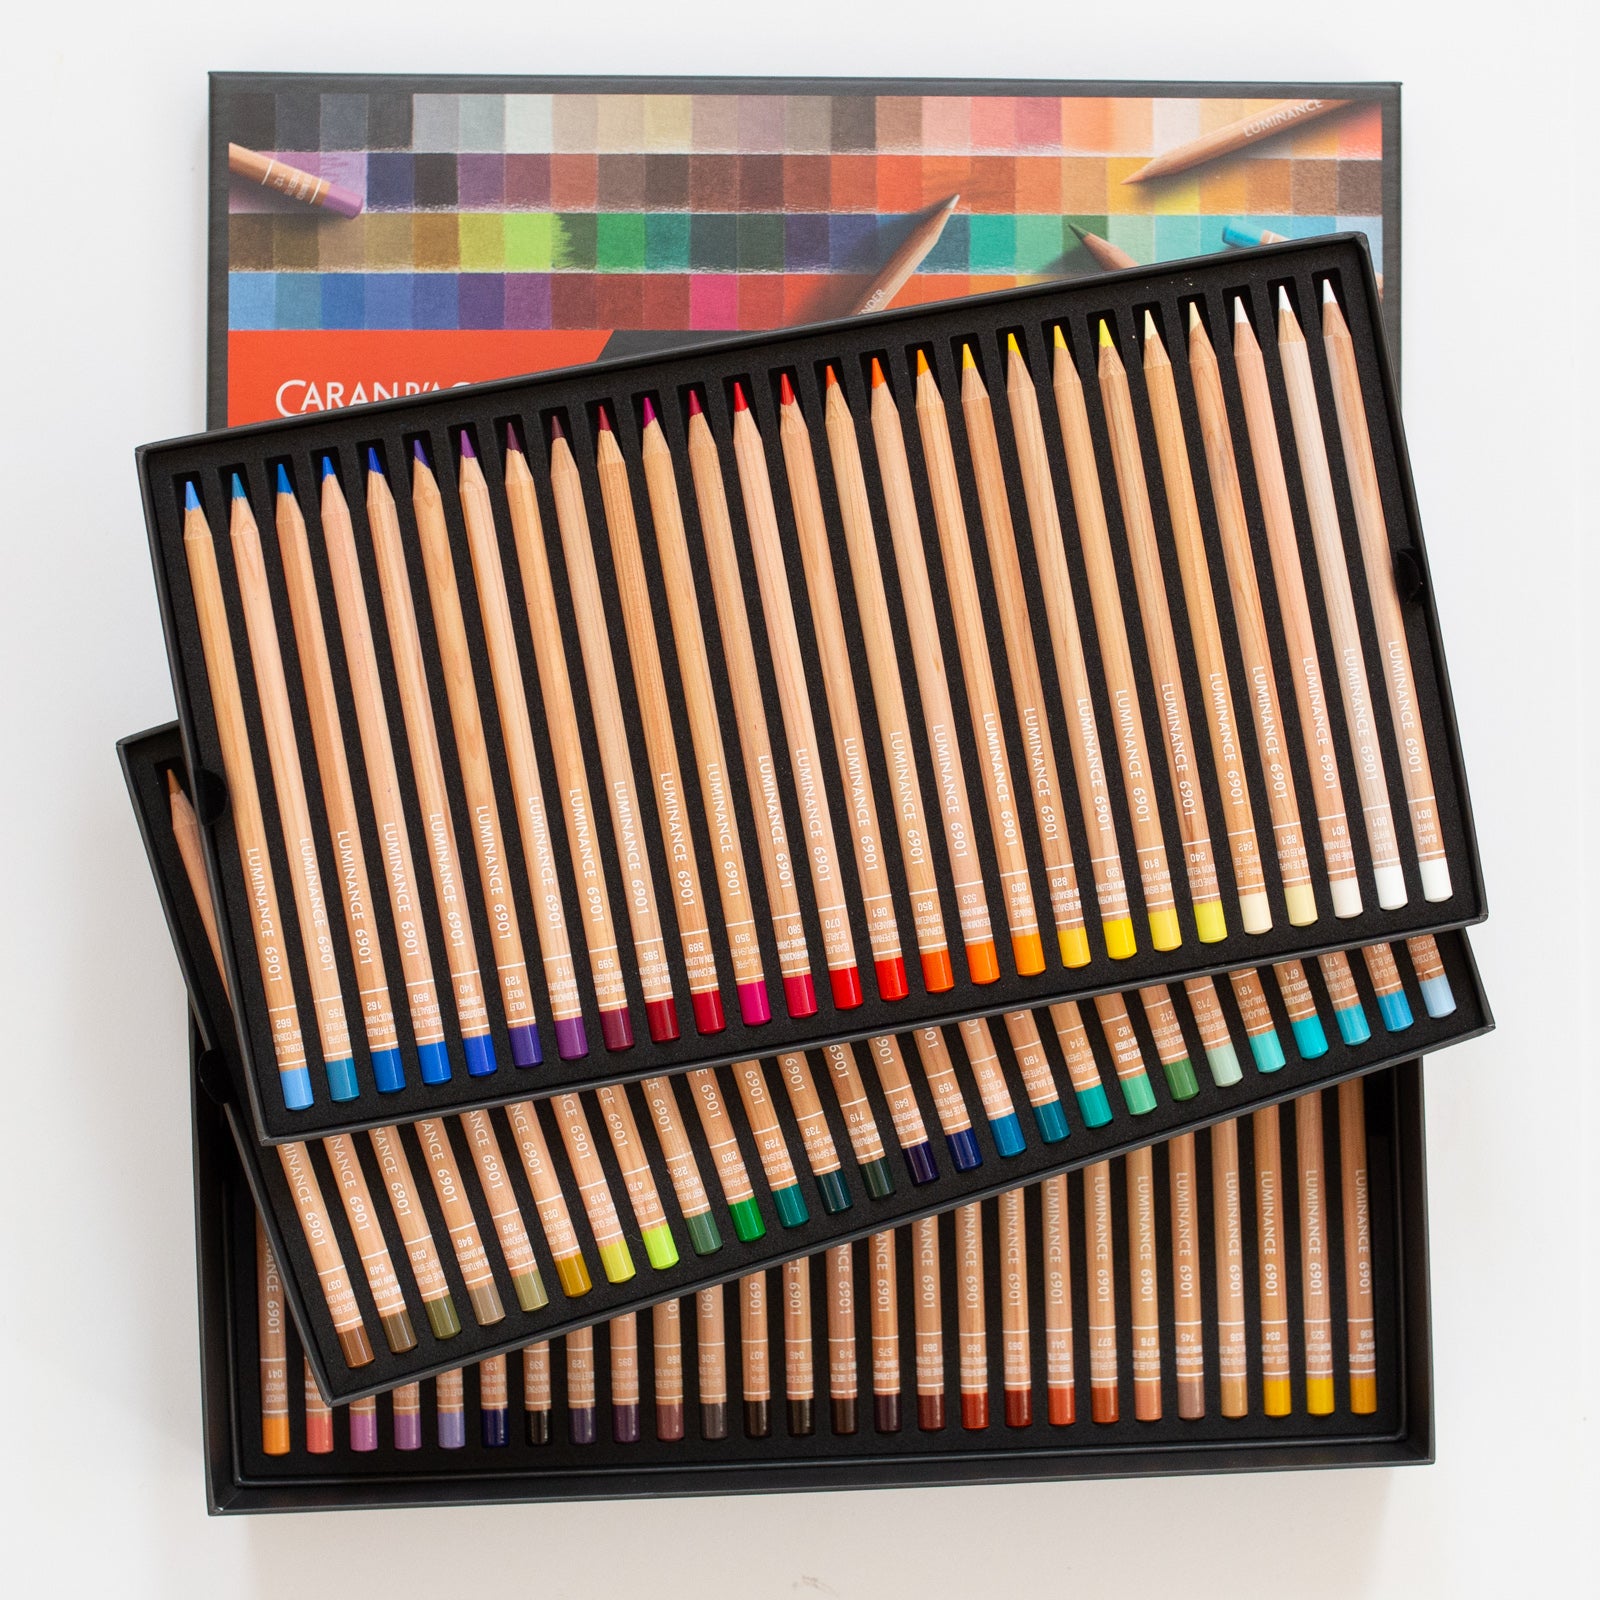 Caran d'Ache : Luminance 6901 : Colour Pencil : Set of 20 Portrait Colours  - Pencil Sets - Sketching and Illustration Gifts - Gifts